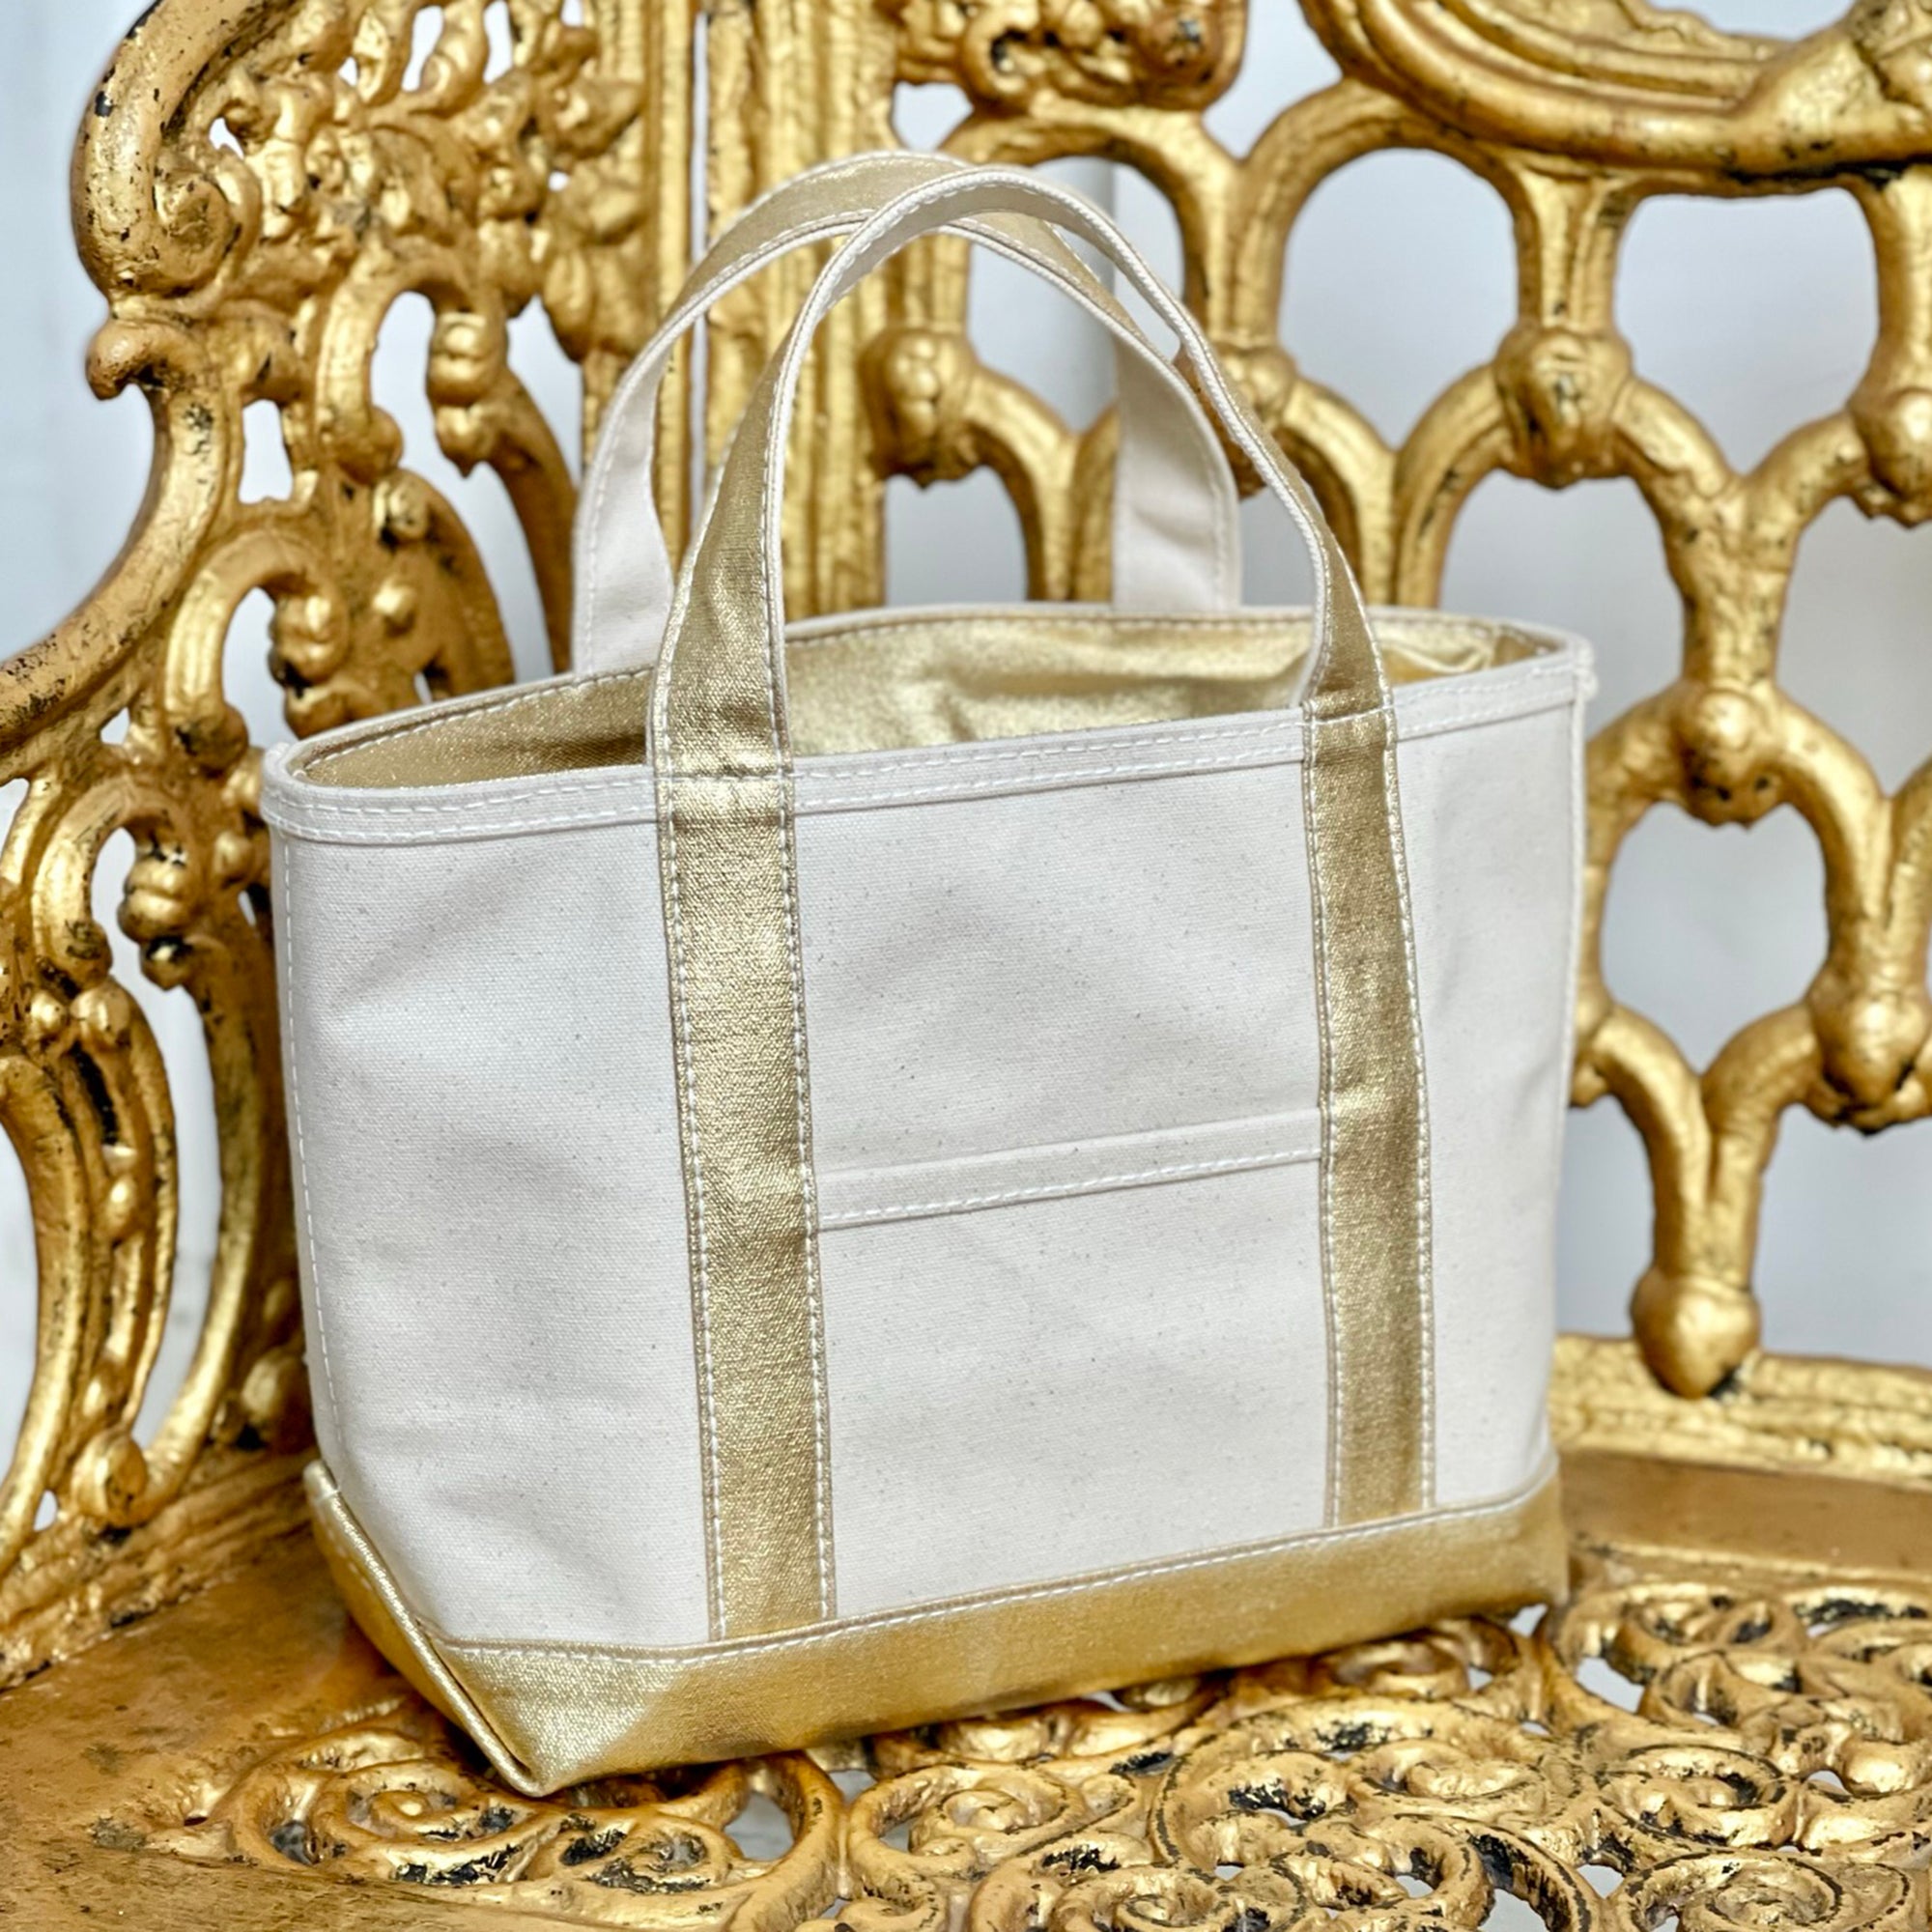 Limited Tote Bag - Gold